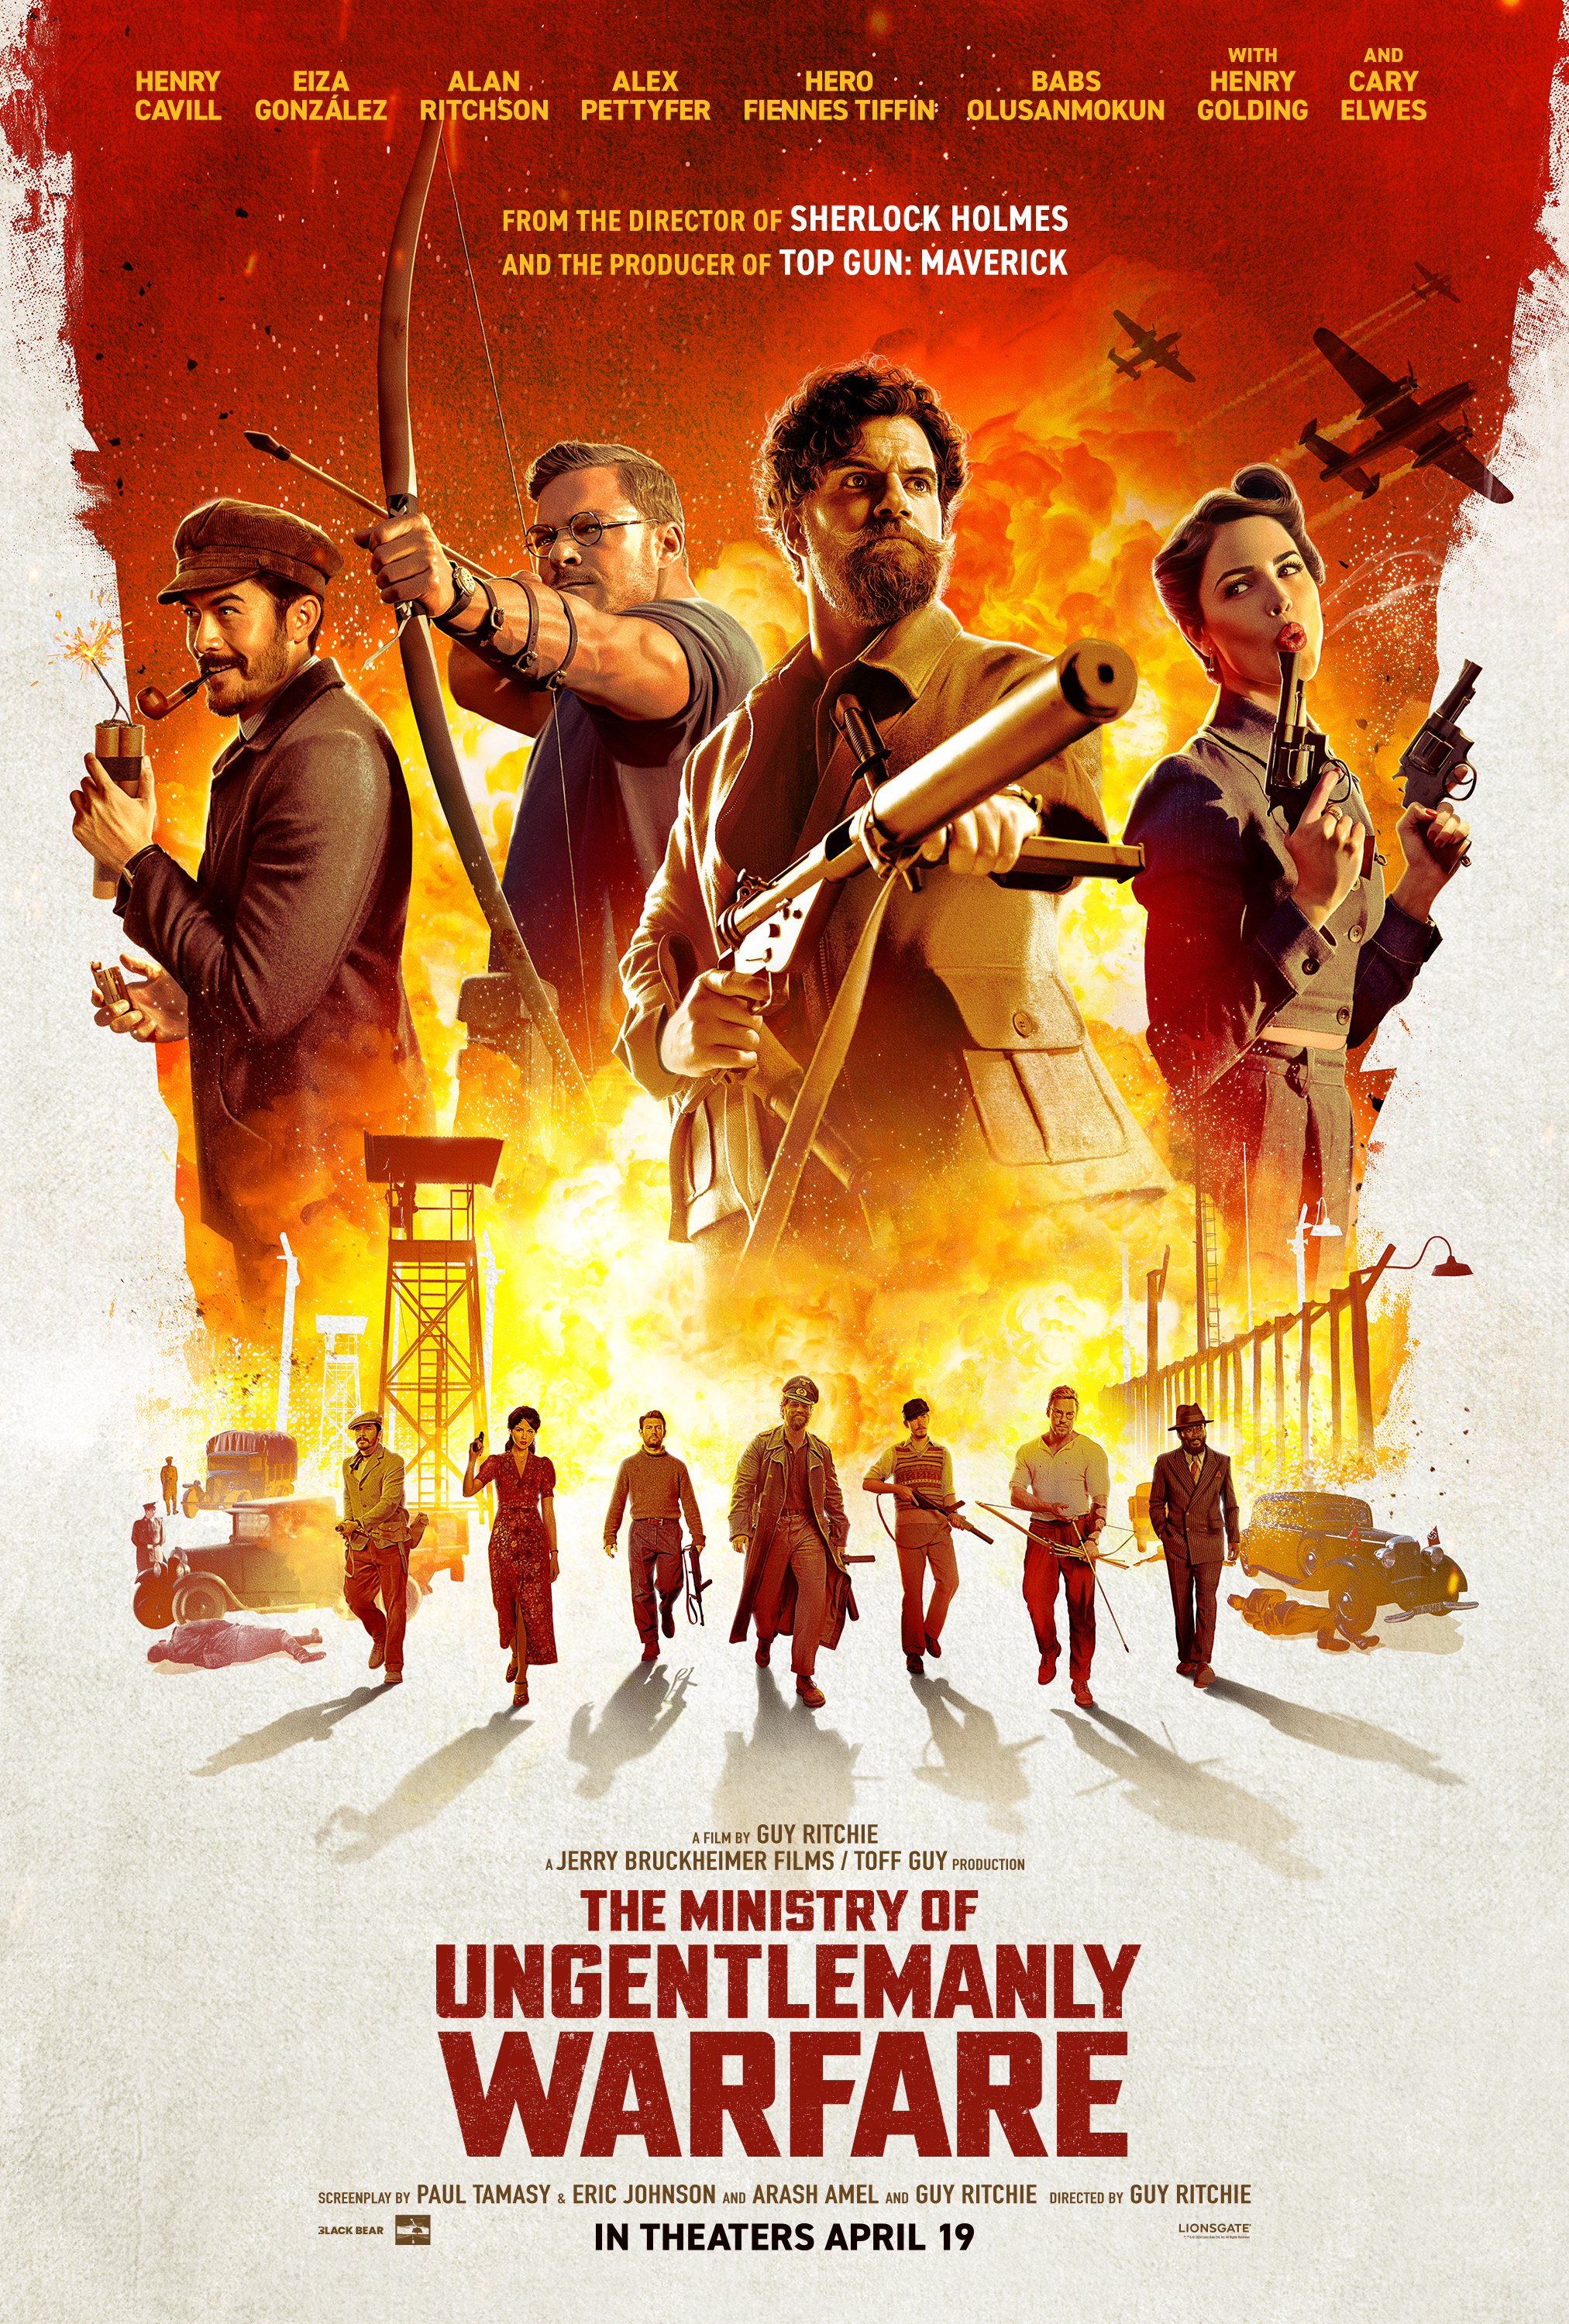 Movie poster for &quot;The Ministry of Ungentlemanly Warfare&quot; featuring main cast posed with action gear, details of director, producer, and release date